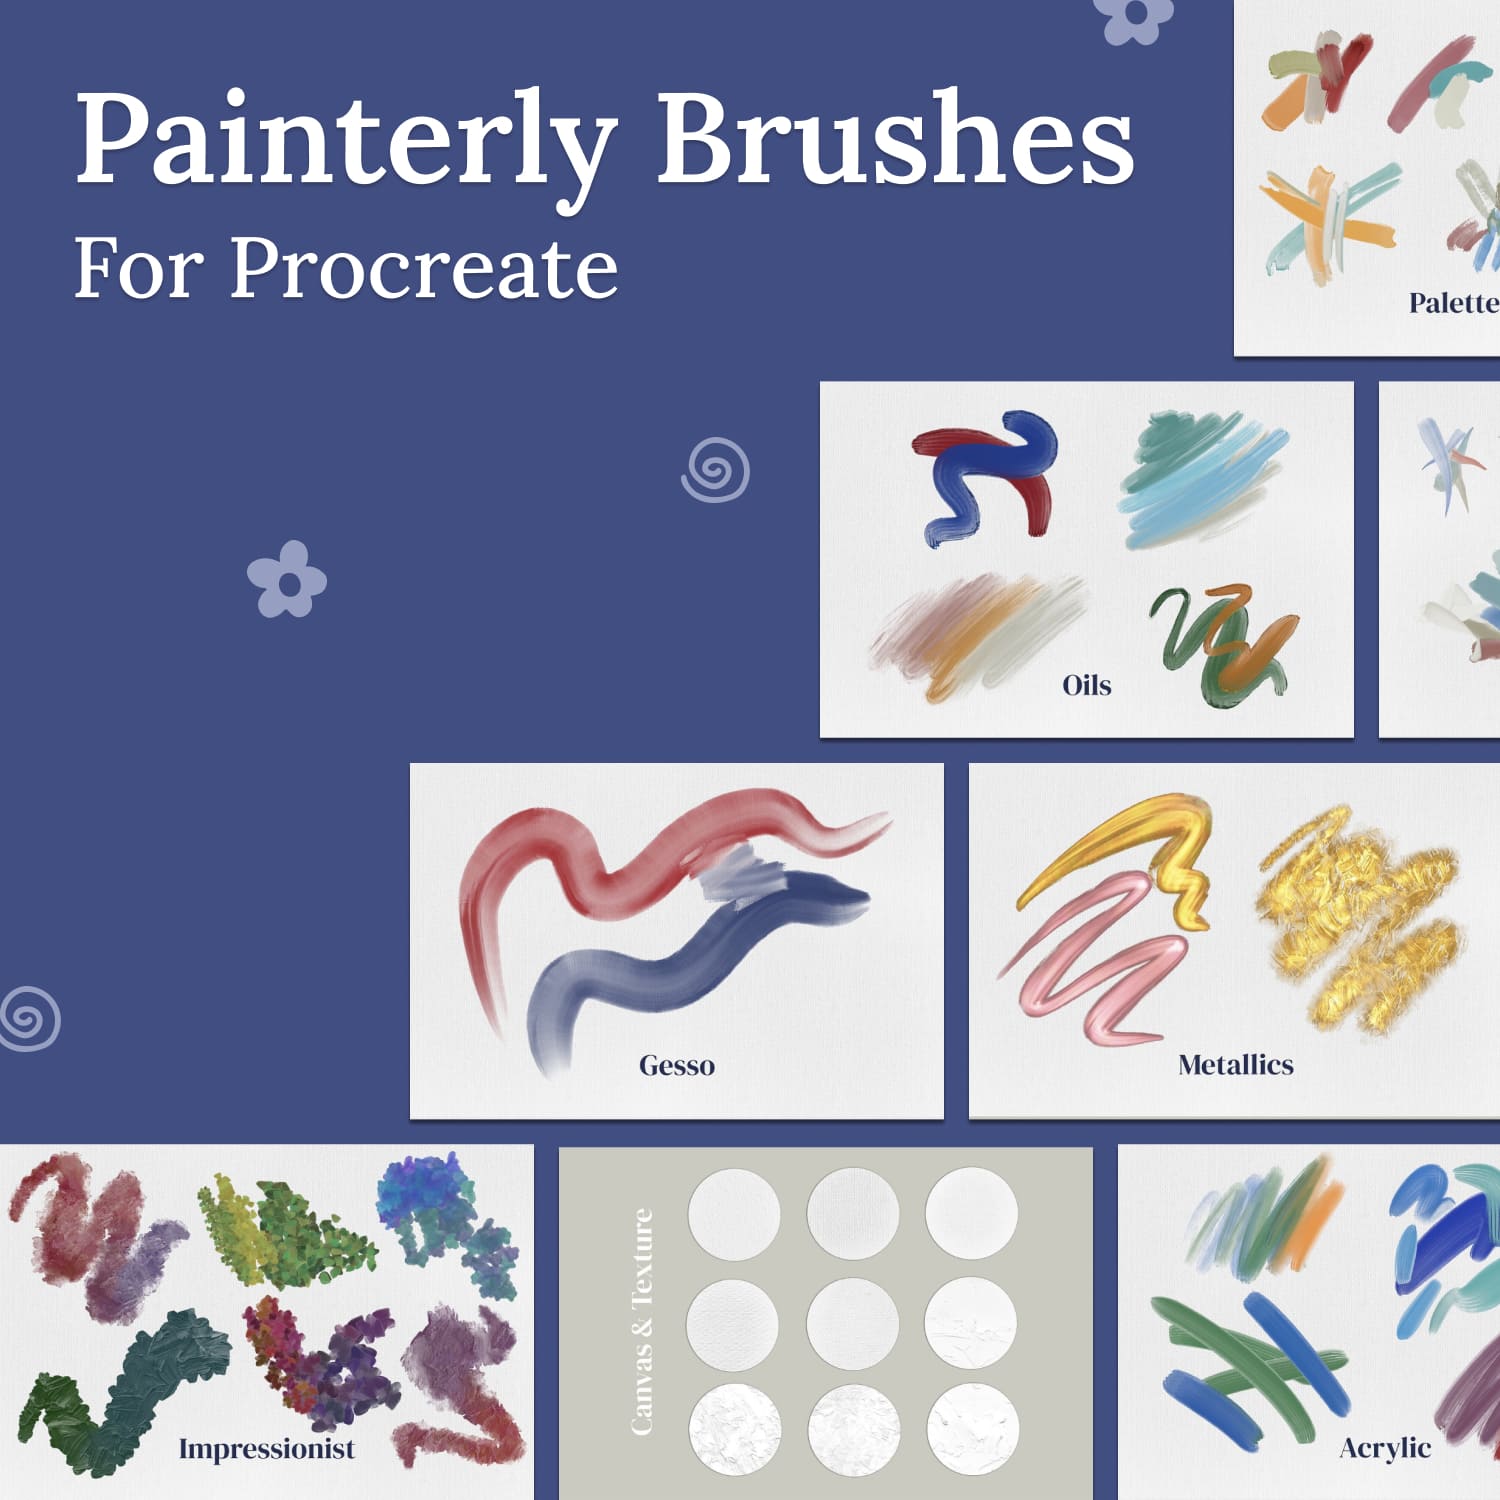 Painterly Brushes for Procreate - main image preview.